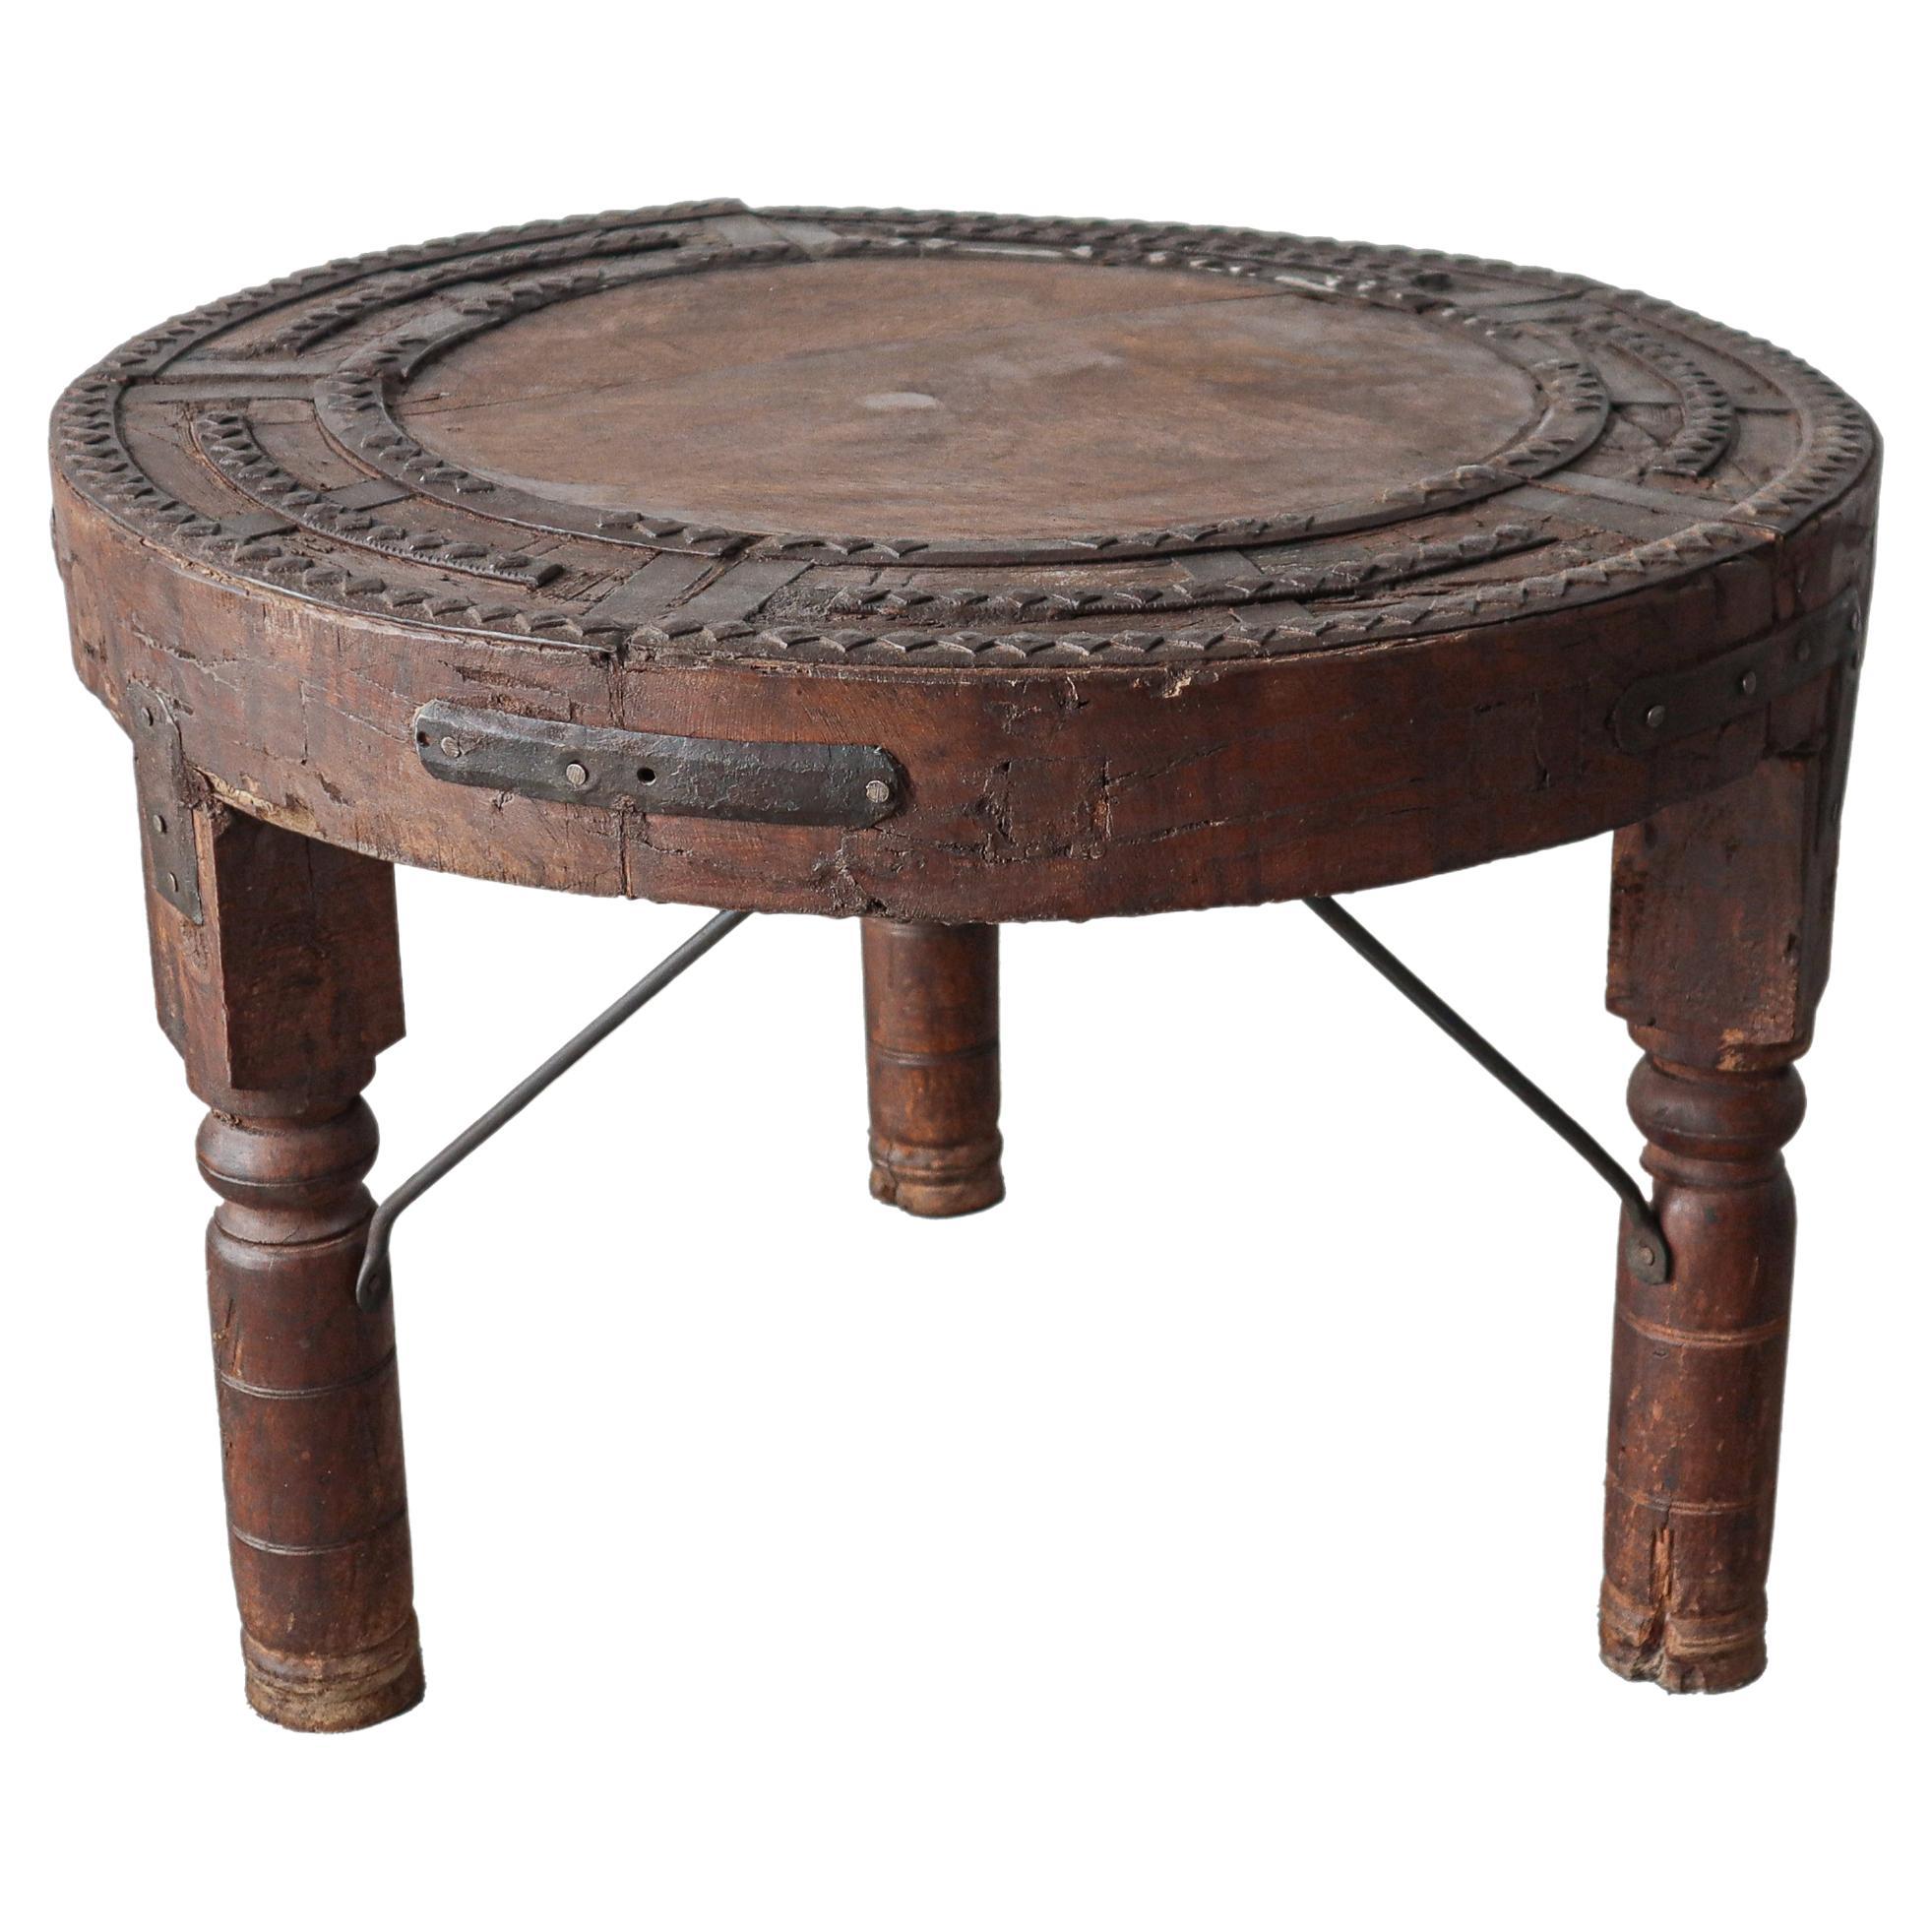 Antique Indian Bullock Cart Wheel Table For Sale